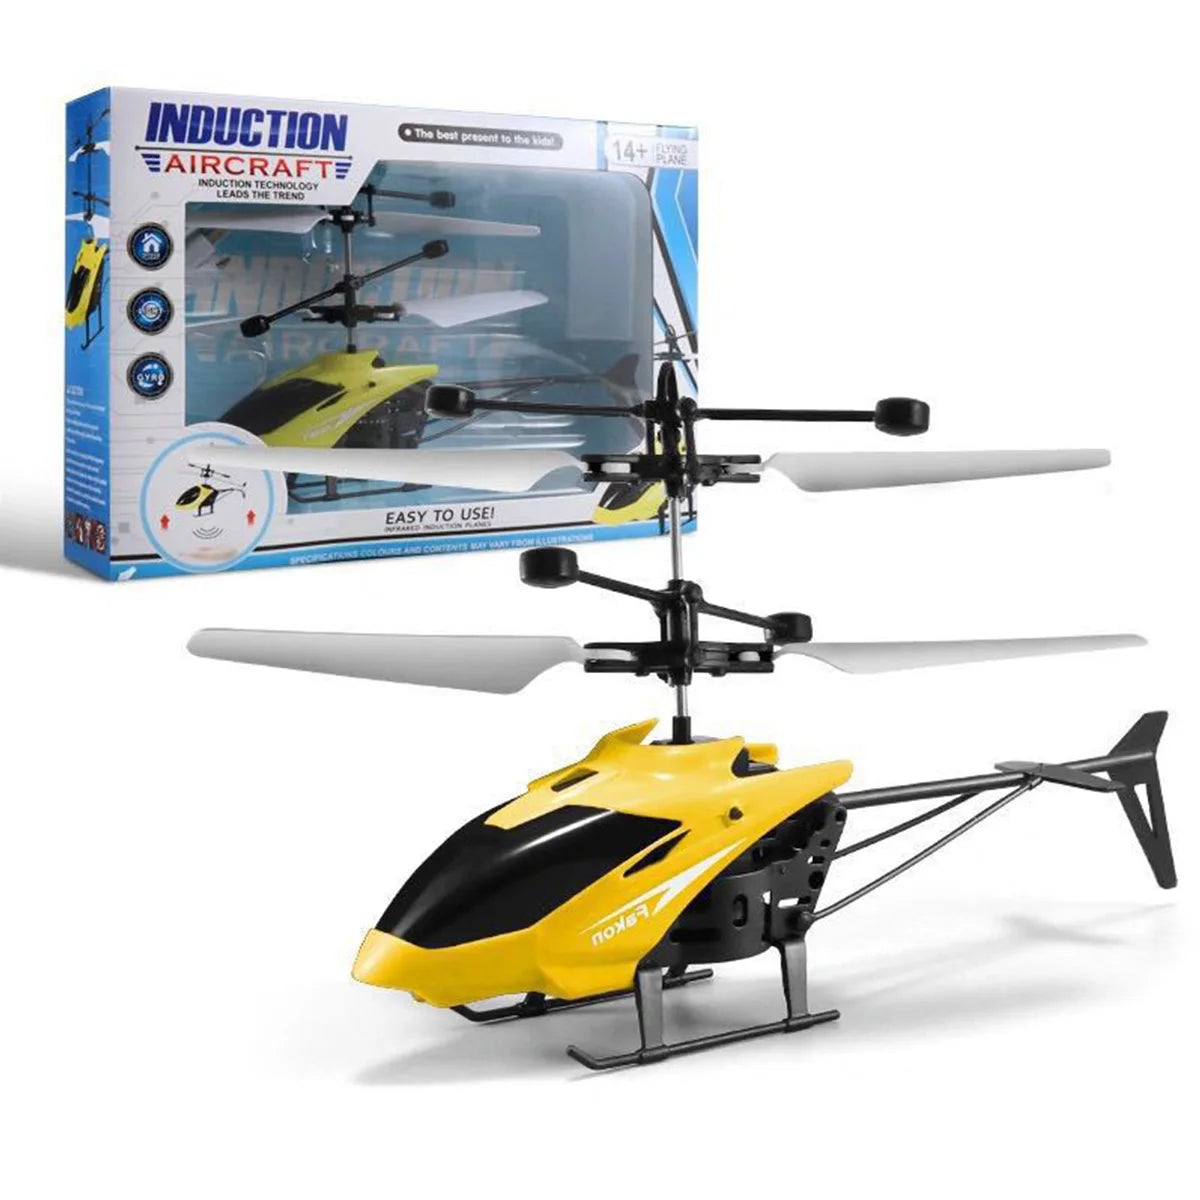 CY-38 Rc Helicopter, Denlcettontid AIRCRAFTE oucior IECtol